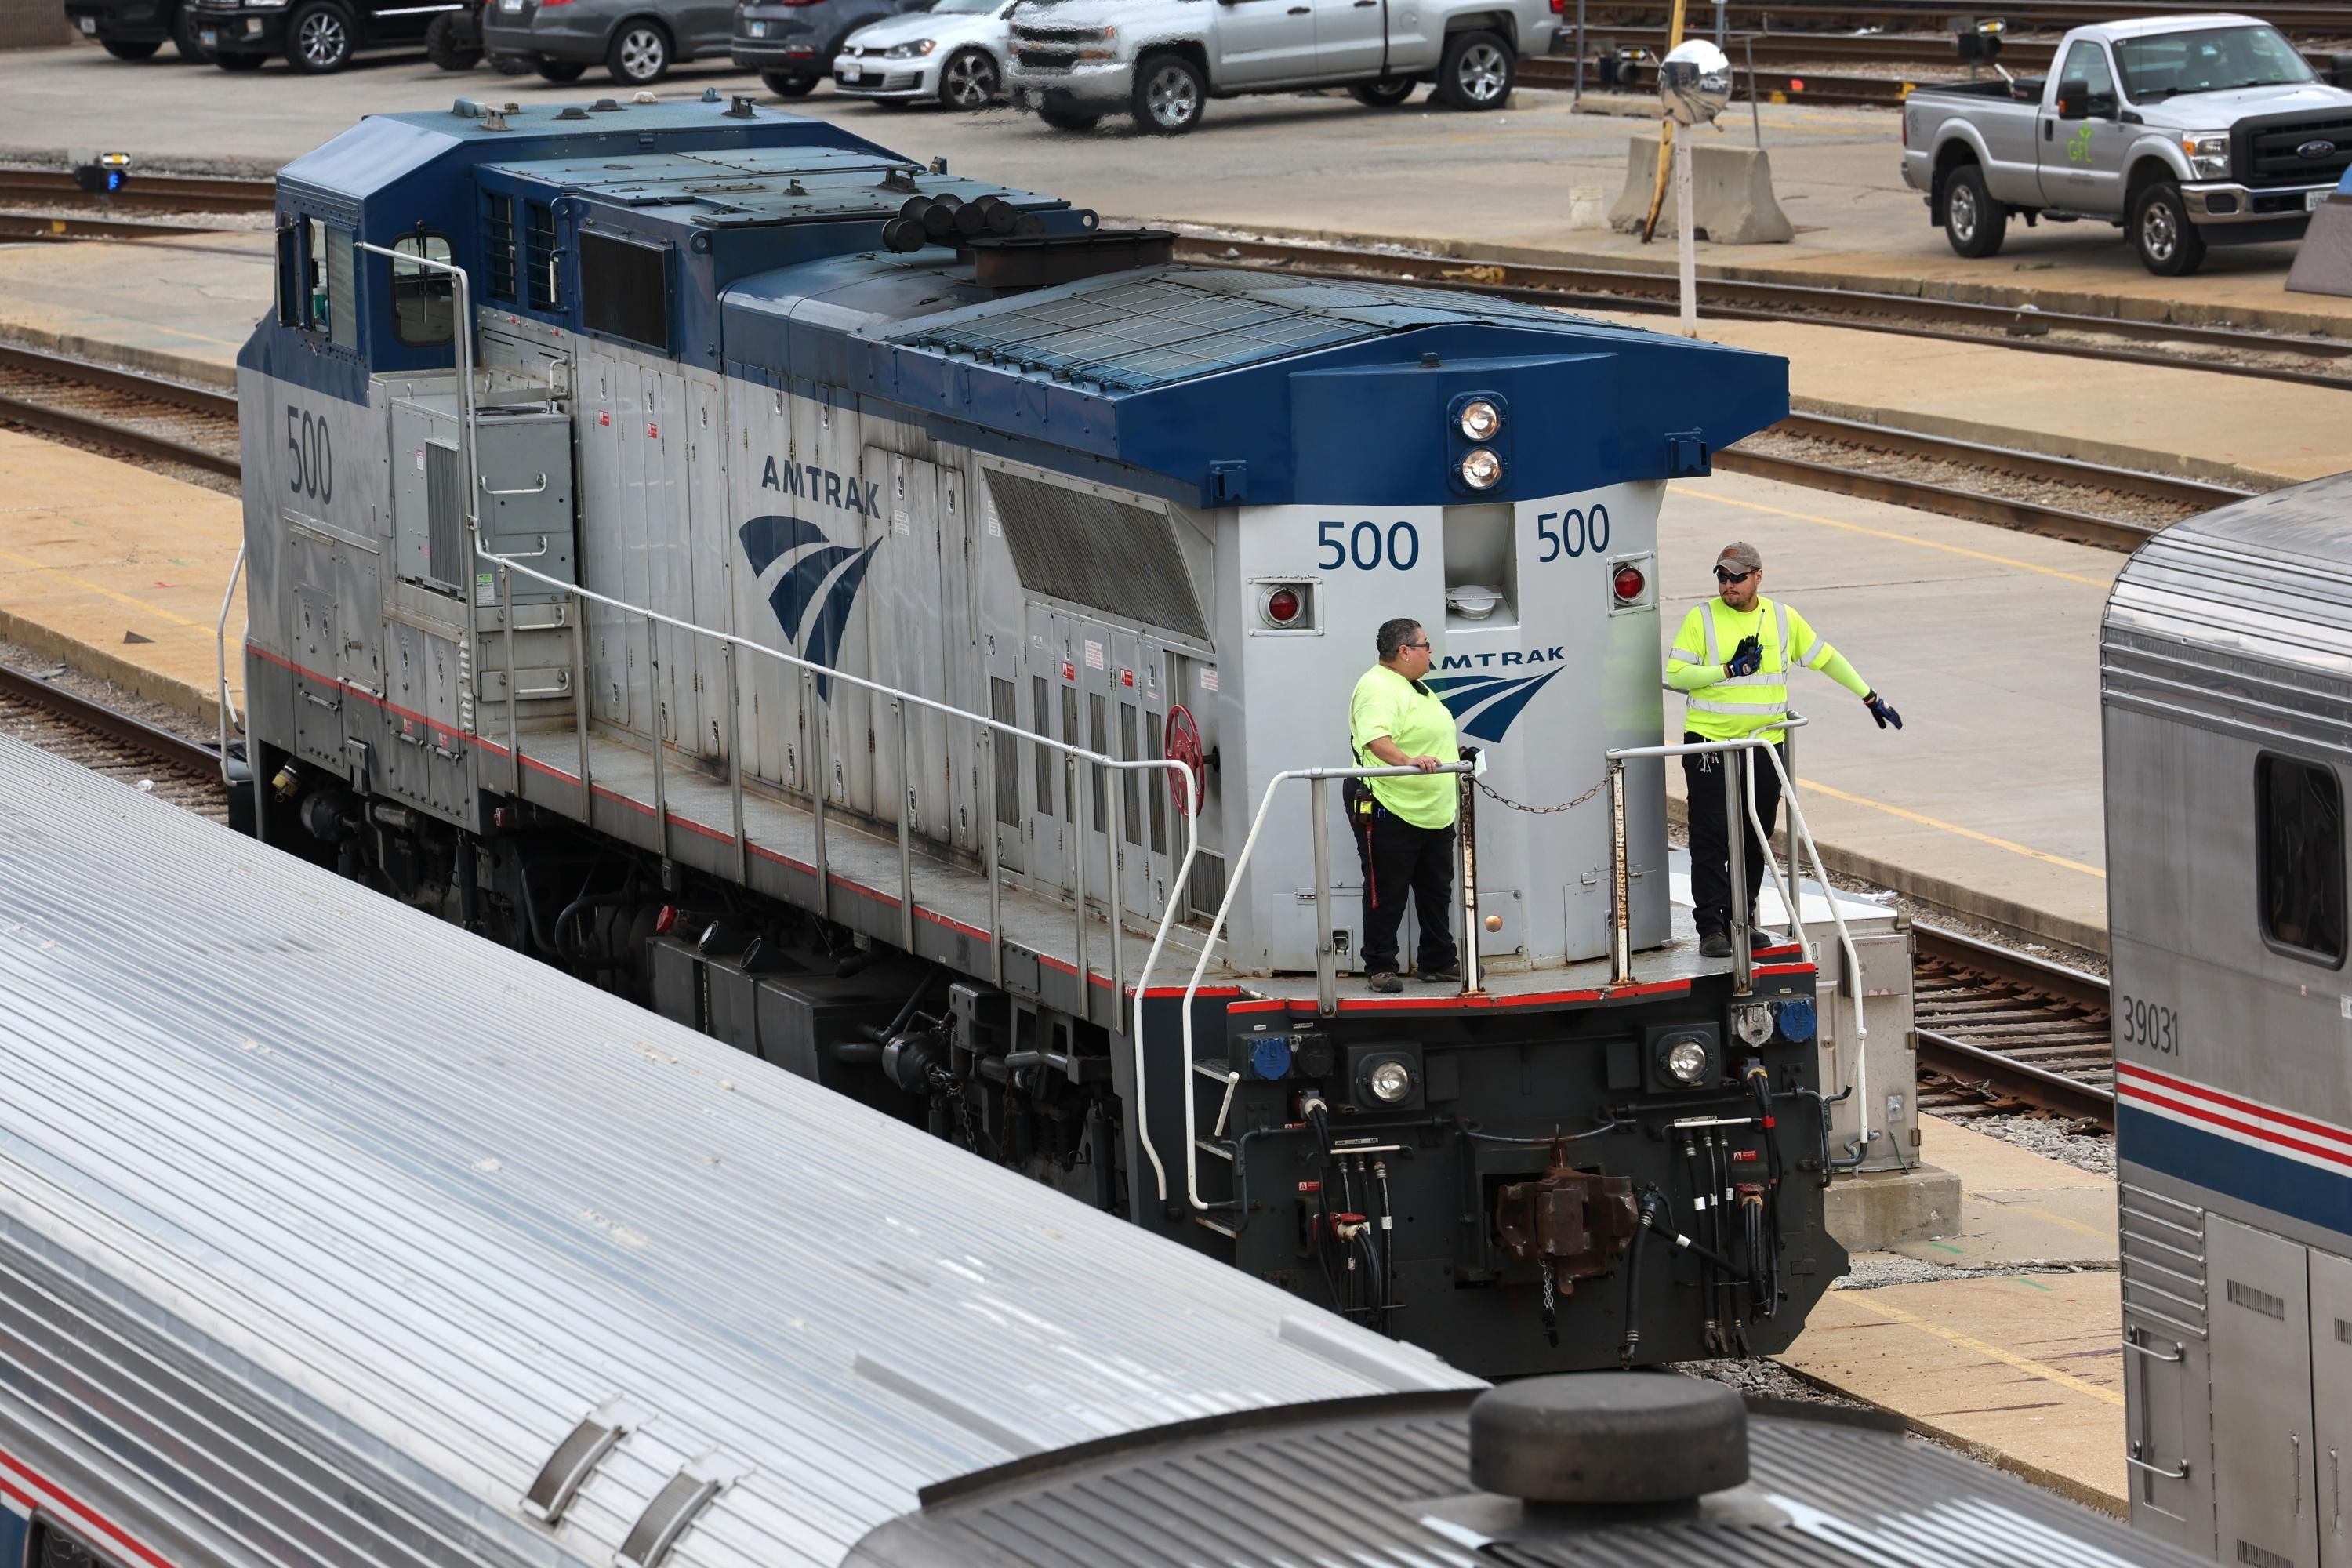 Amtrak workers service trains